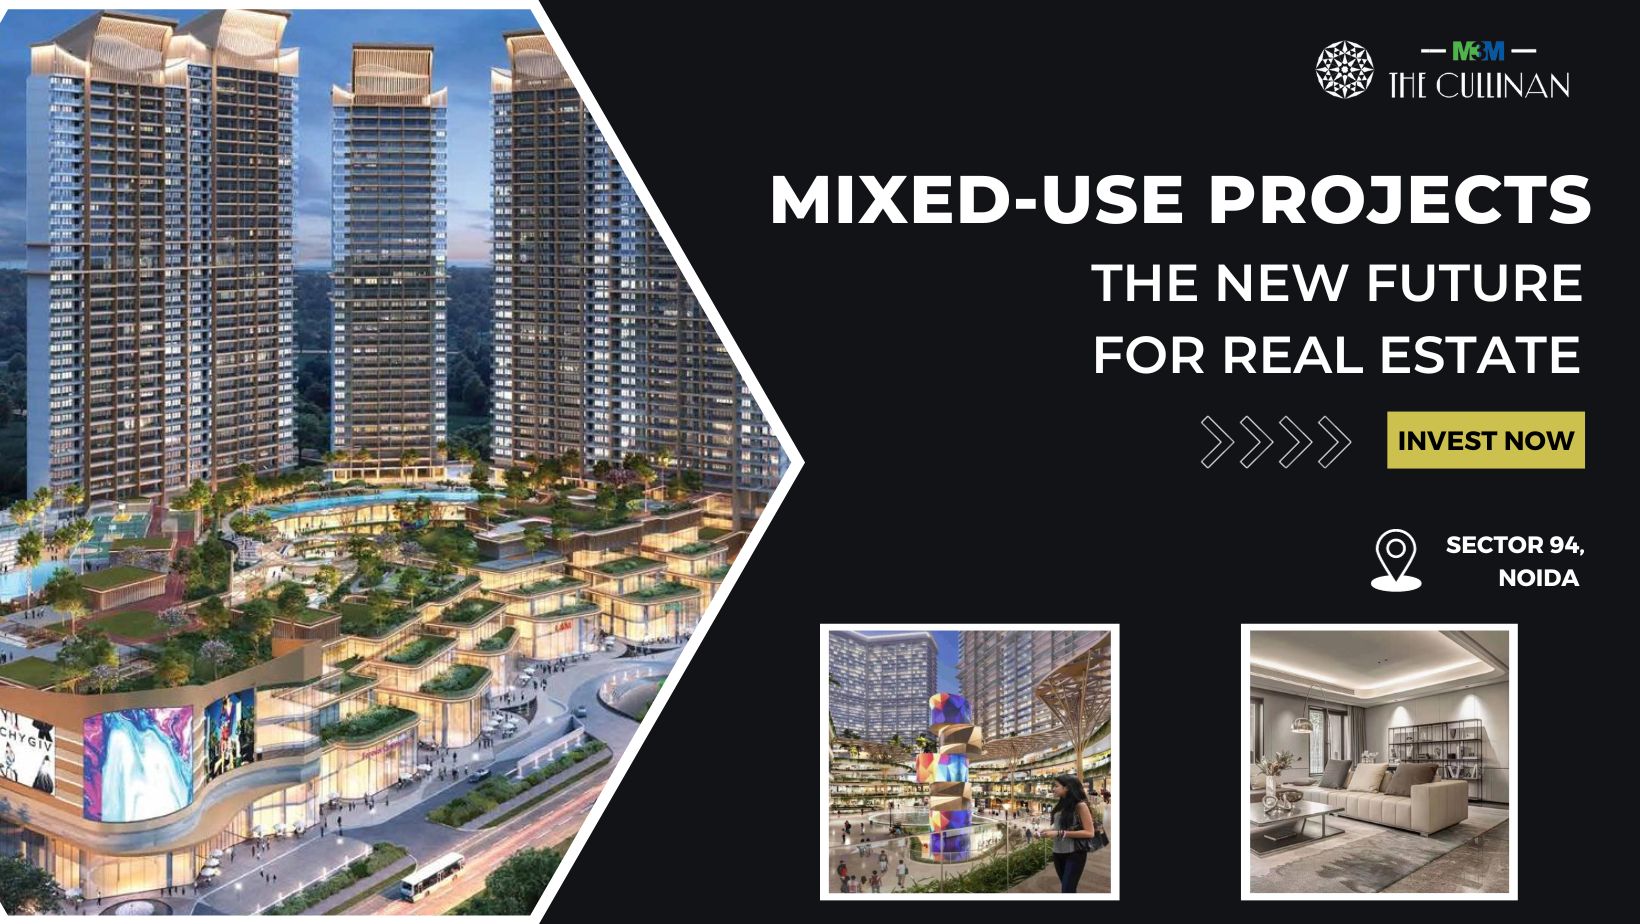 How mixed-use Projects are the new future for Real Estate - M3M The Cullinan